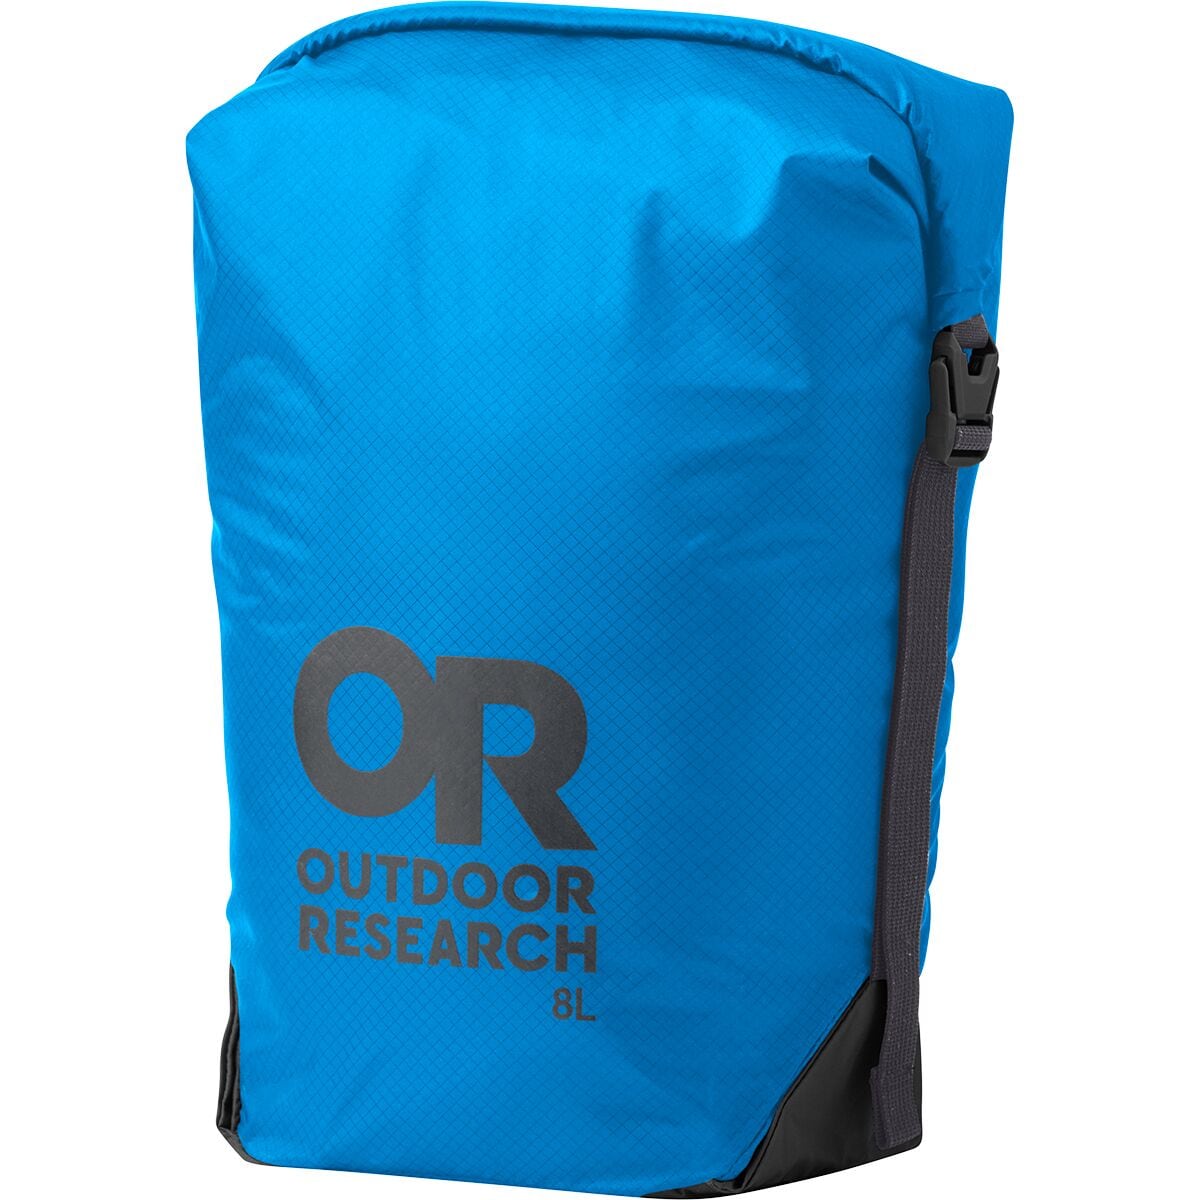 Outdoor Research PackOut Compression 8L Stuff Sack